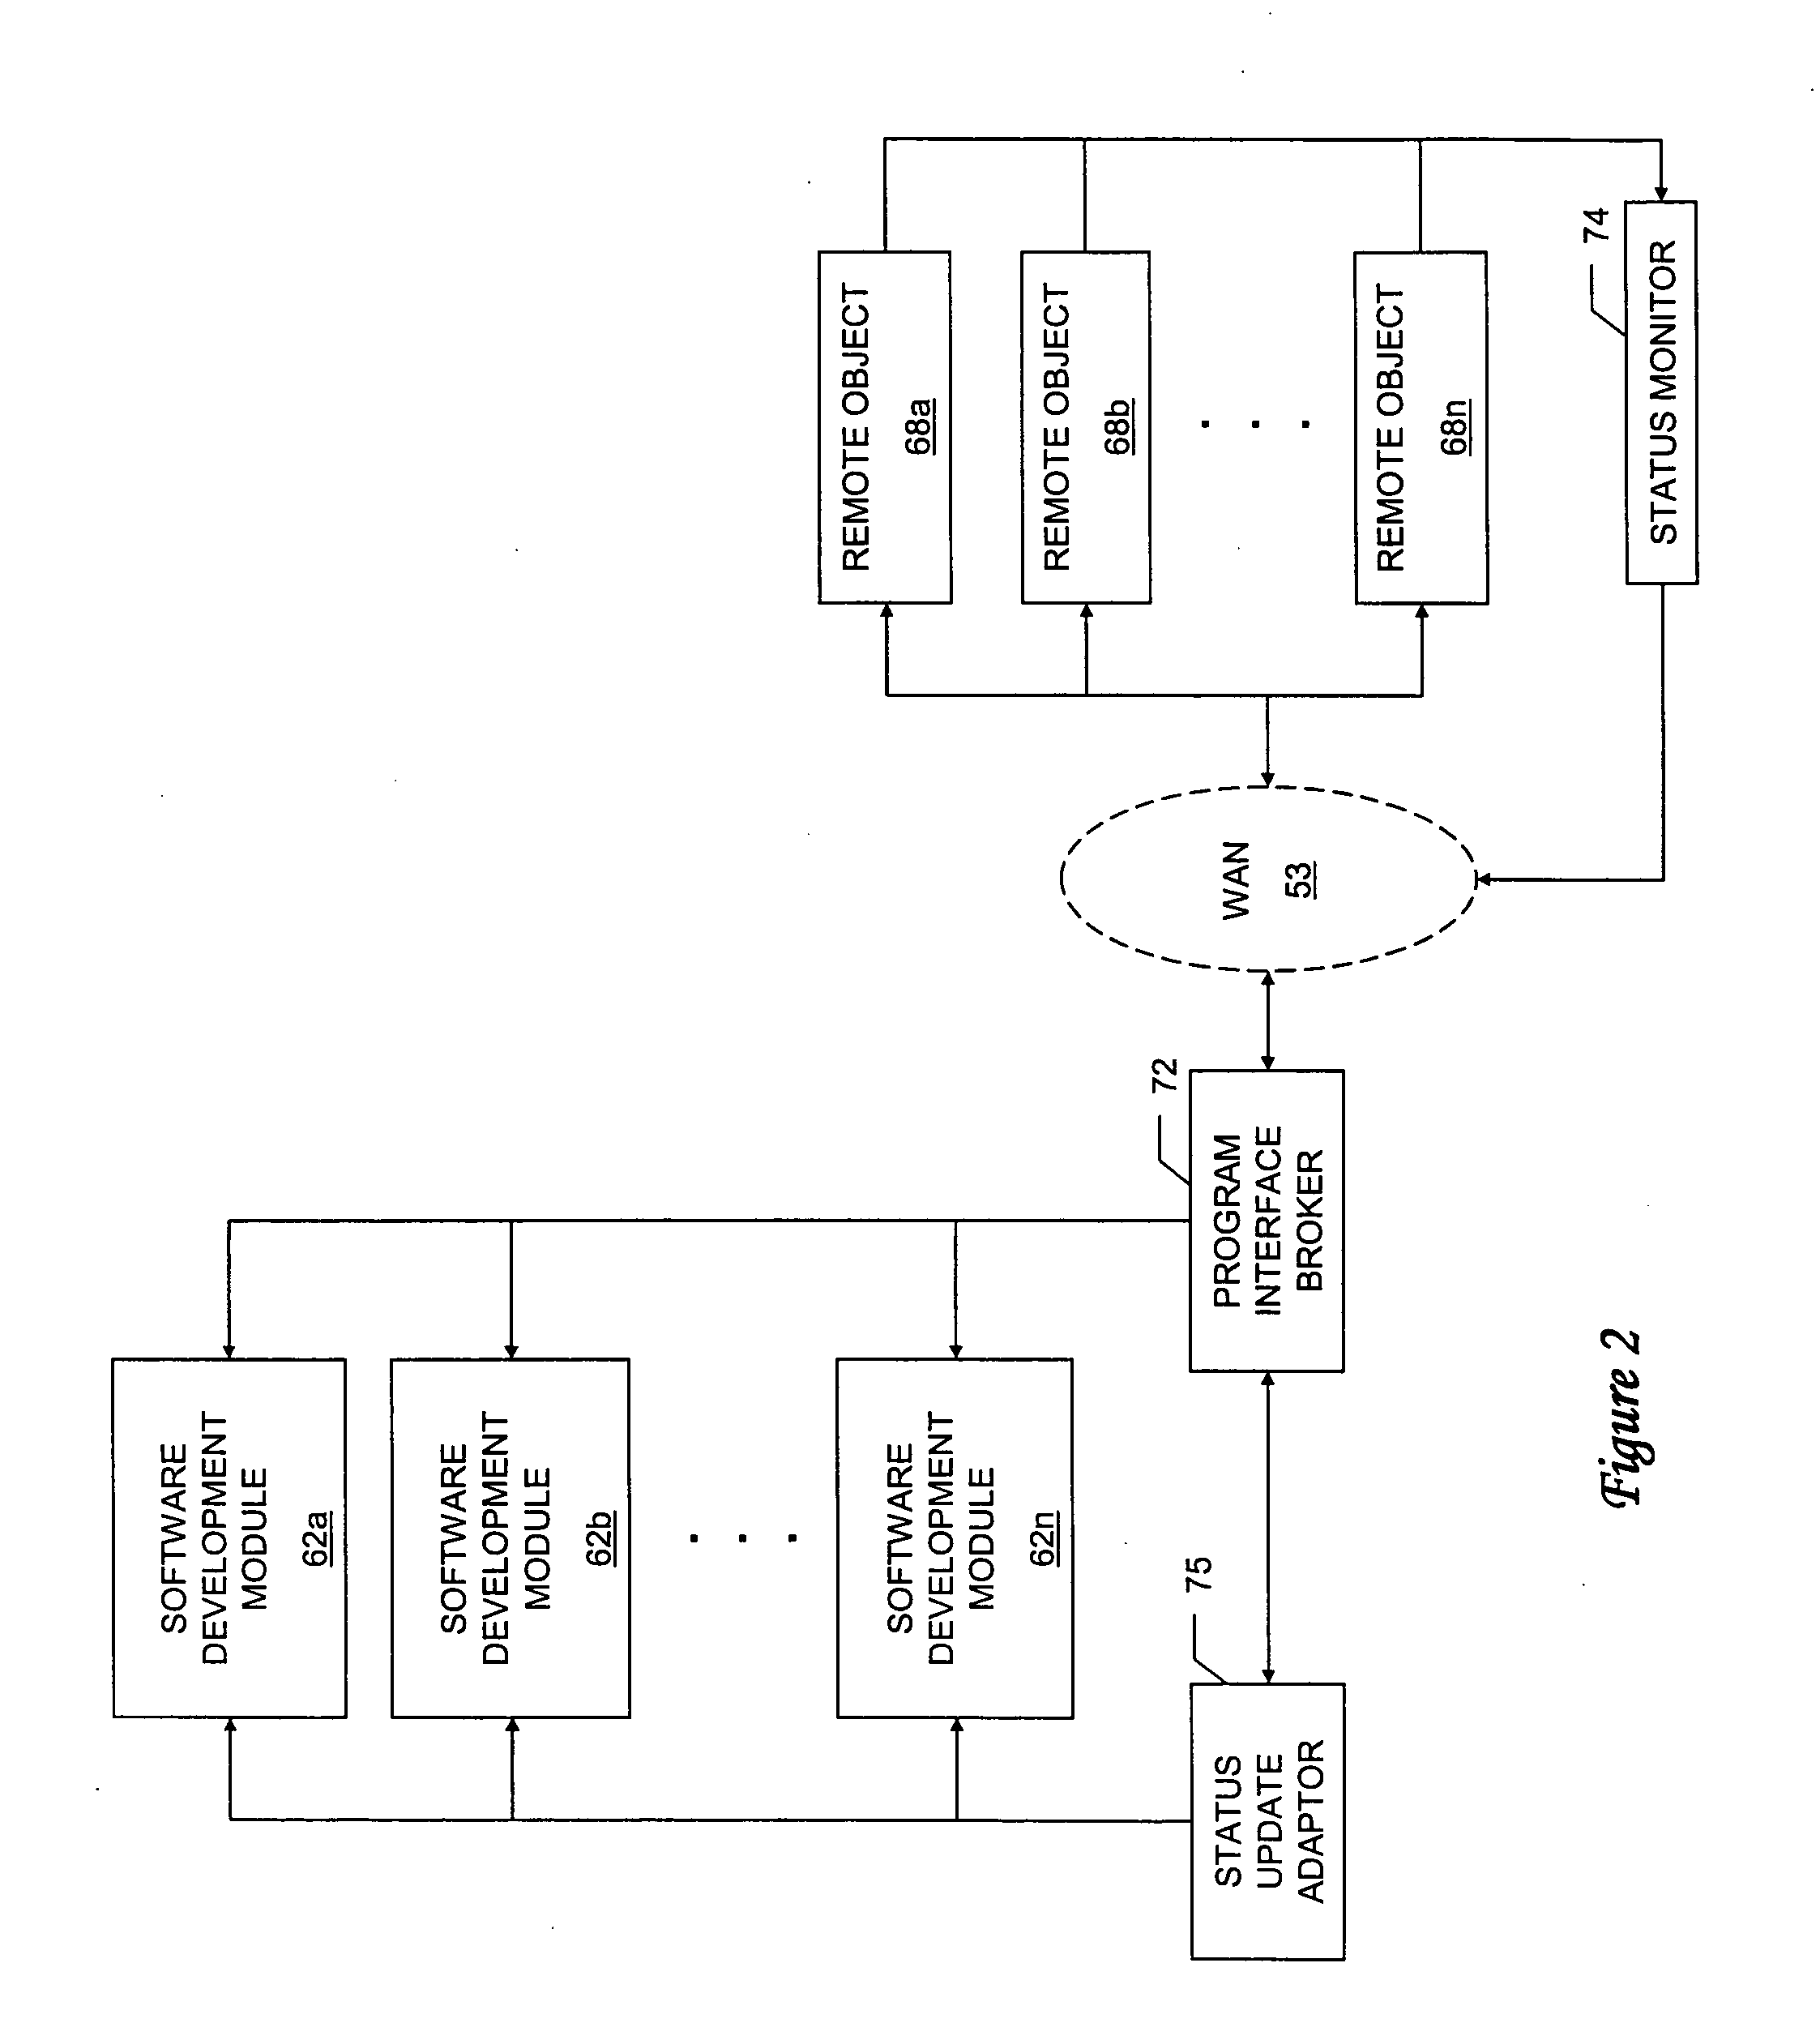 System and method for revealing remote object status in an integrated development environment